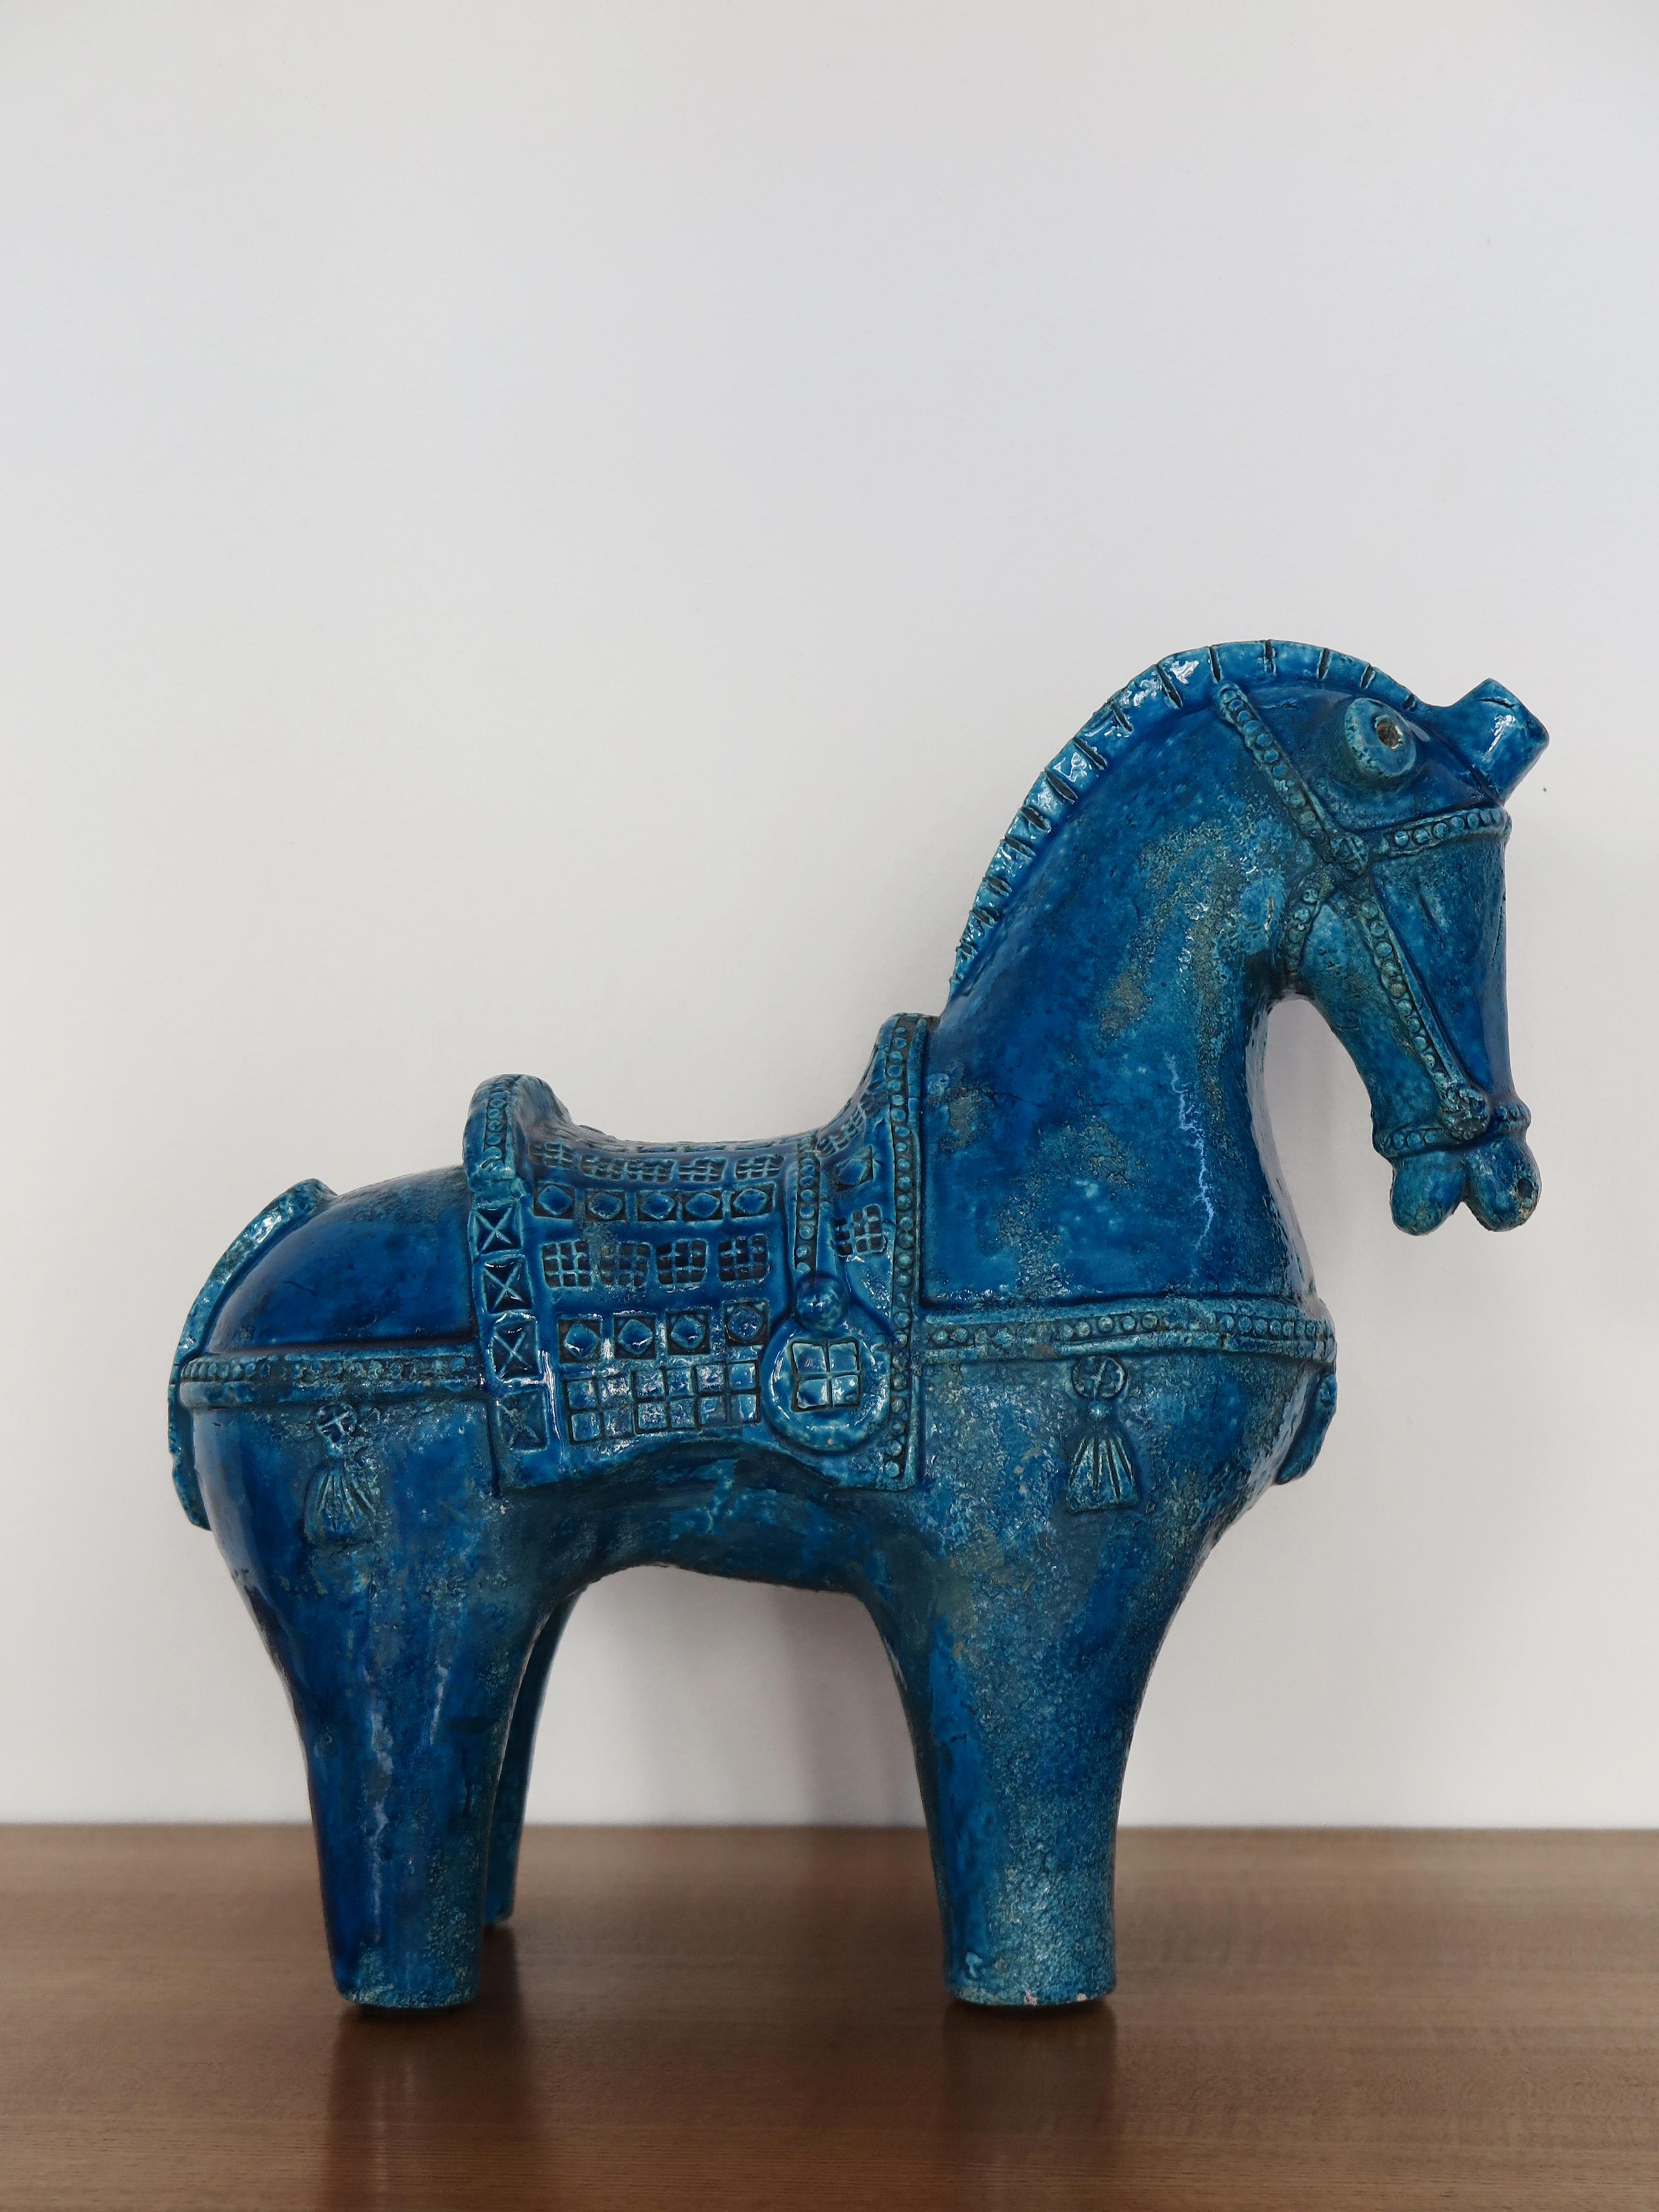 Italian midcentury modern design large blue glazed ceramic stylized horse sculpture designed by Aldo Londi and produced by Bitossi Fiorentino, Italy 1960s

Please note that the ceramic is original of the period and this shows normal signs of age and